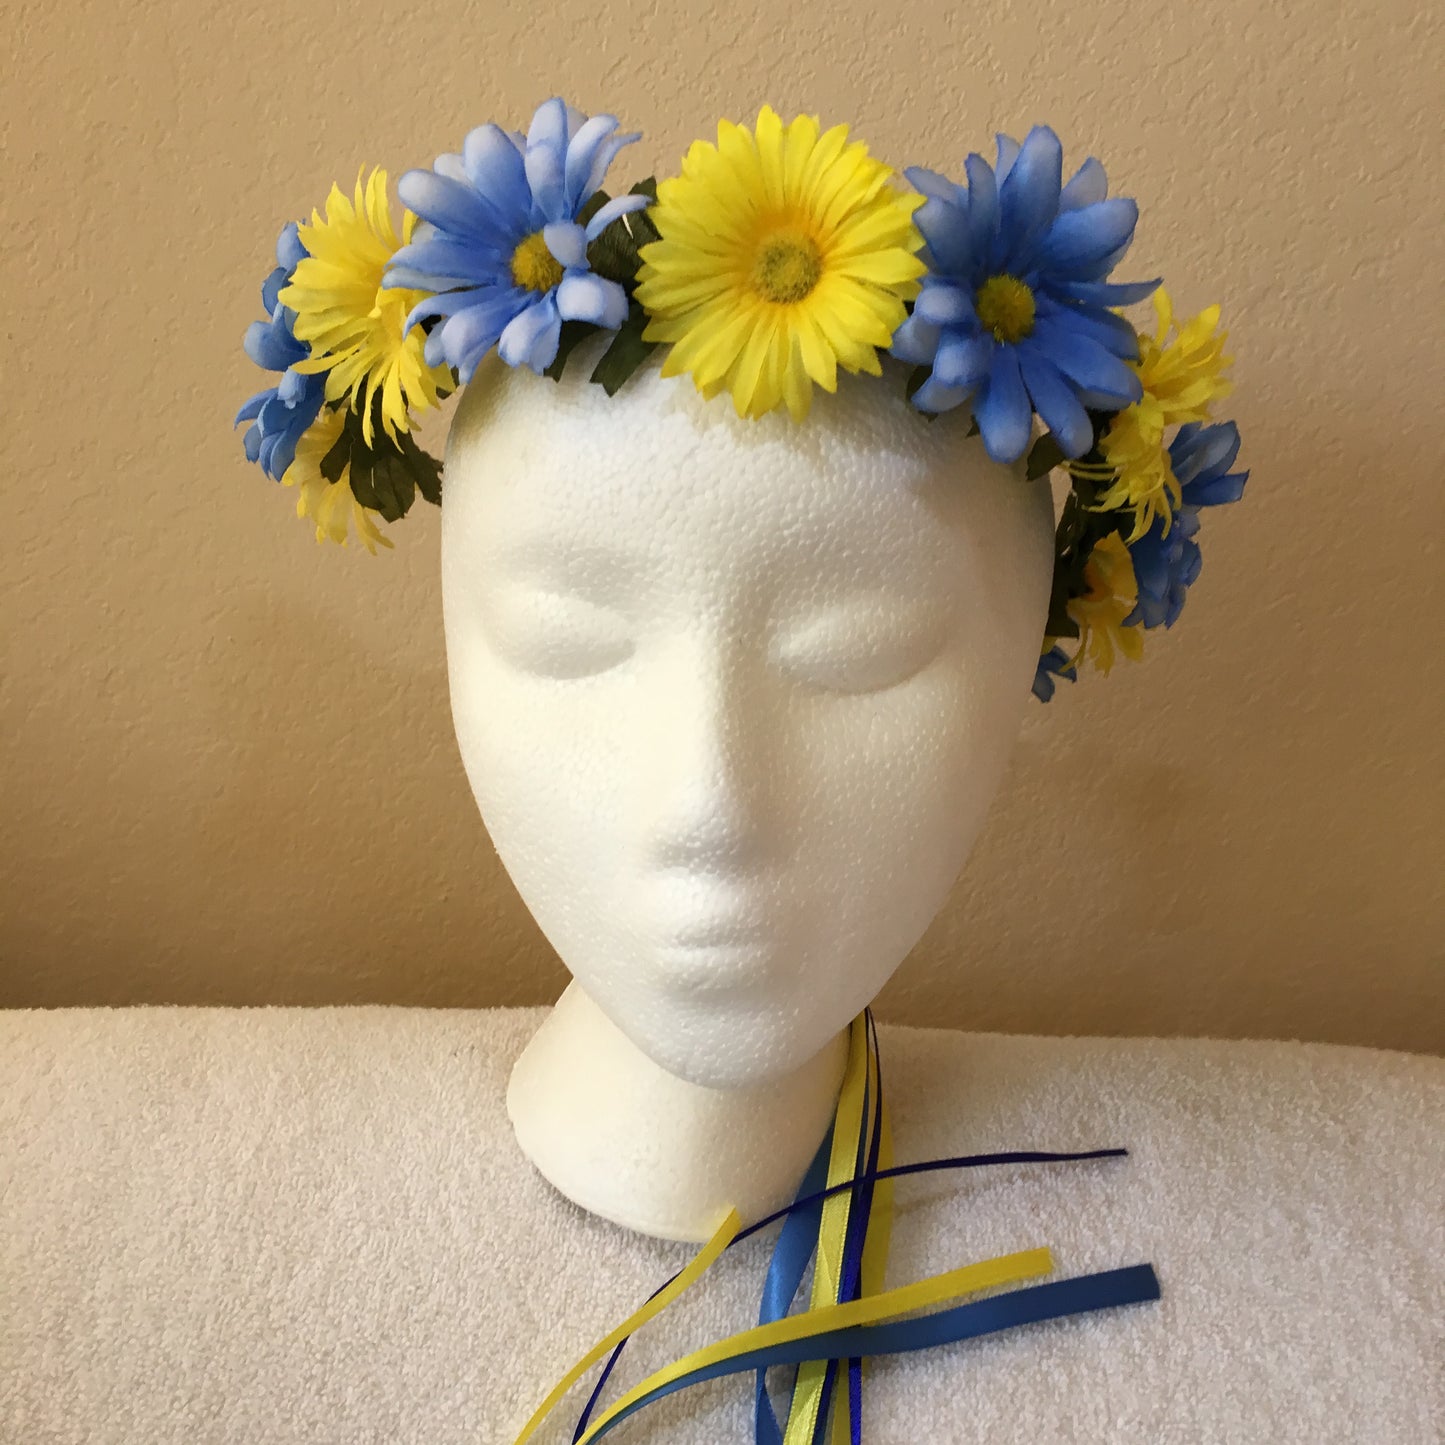 Small Wreath - Blue & yellow daisies